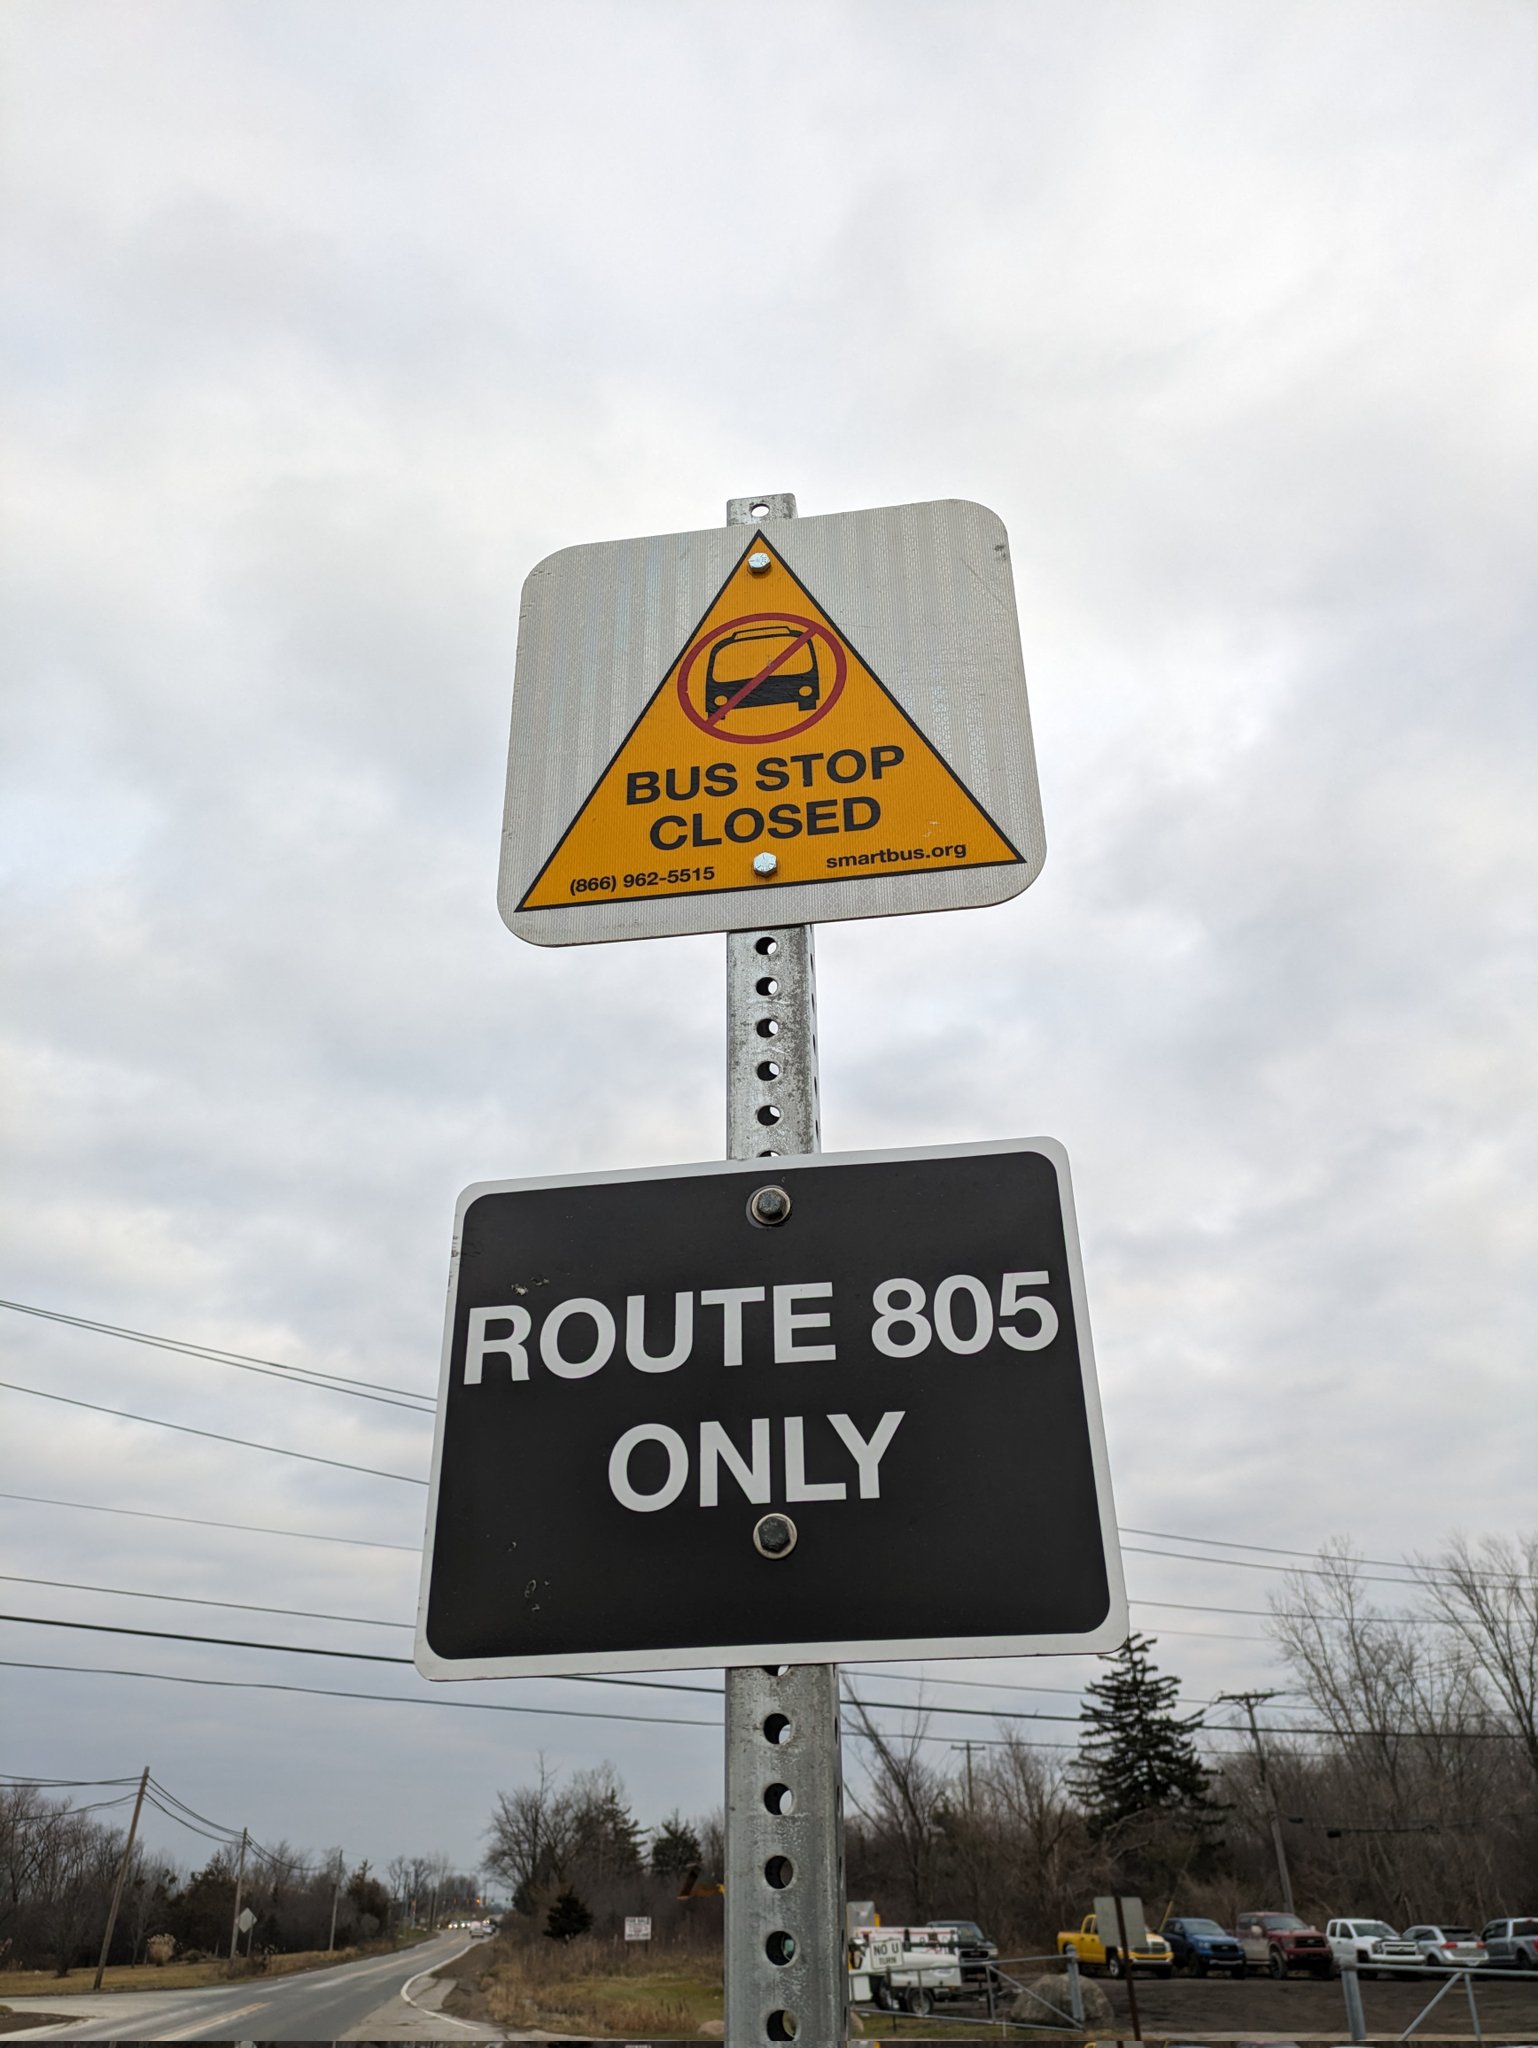 Close up of a sign bolted to the stop pole indicating its permanent closure